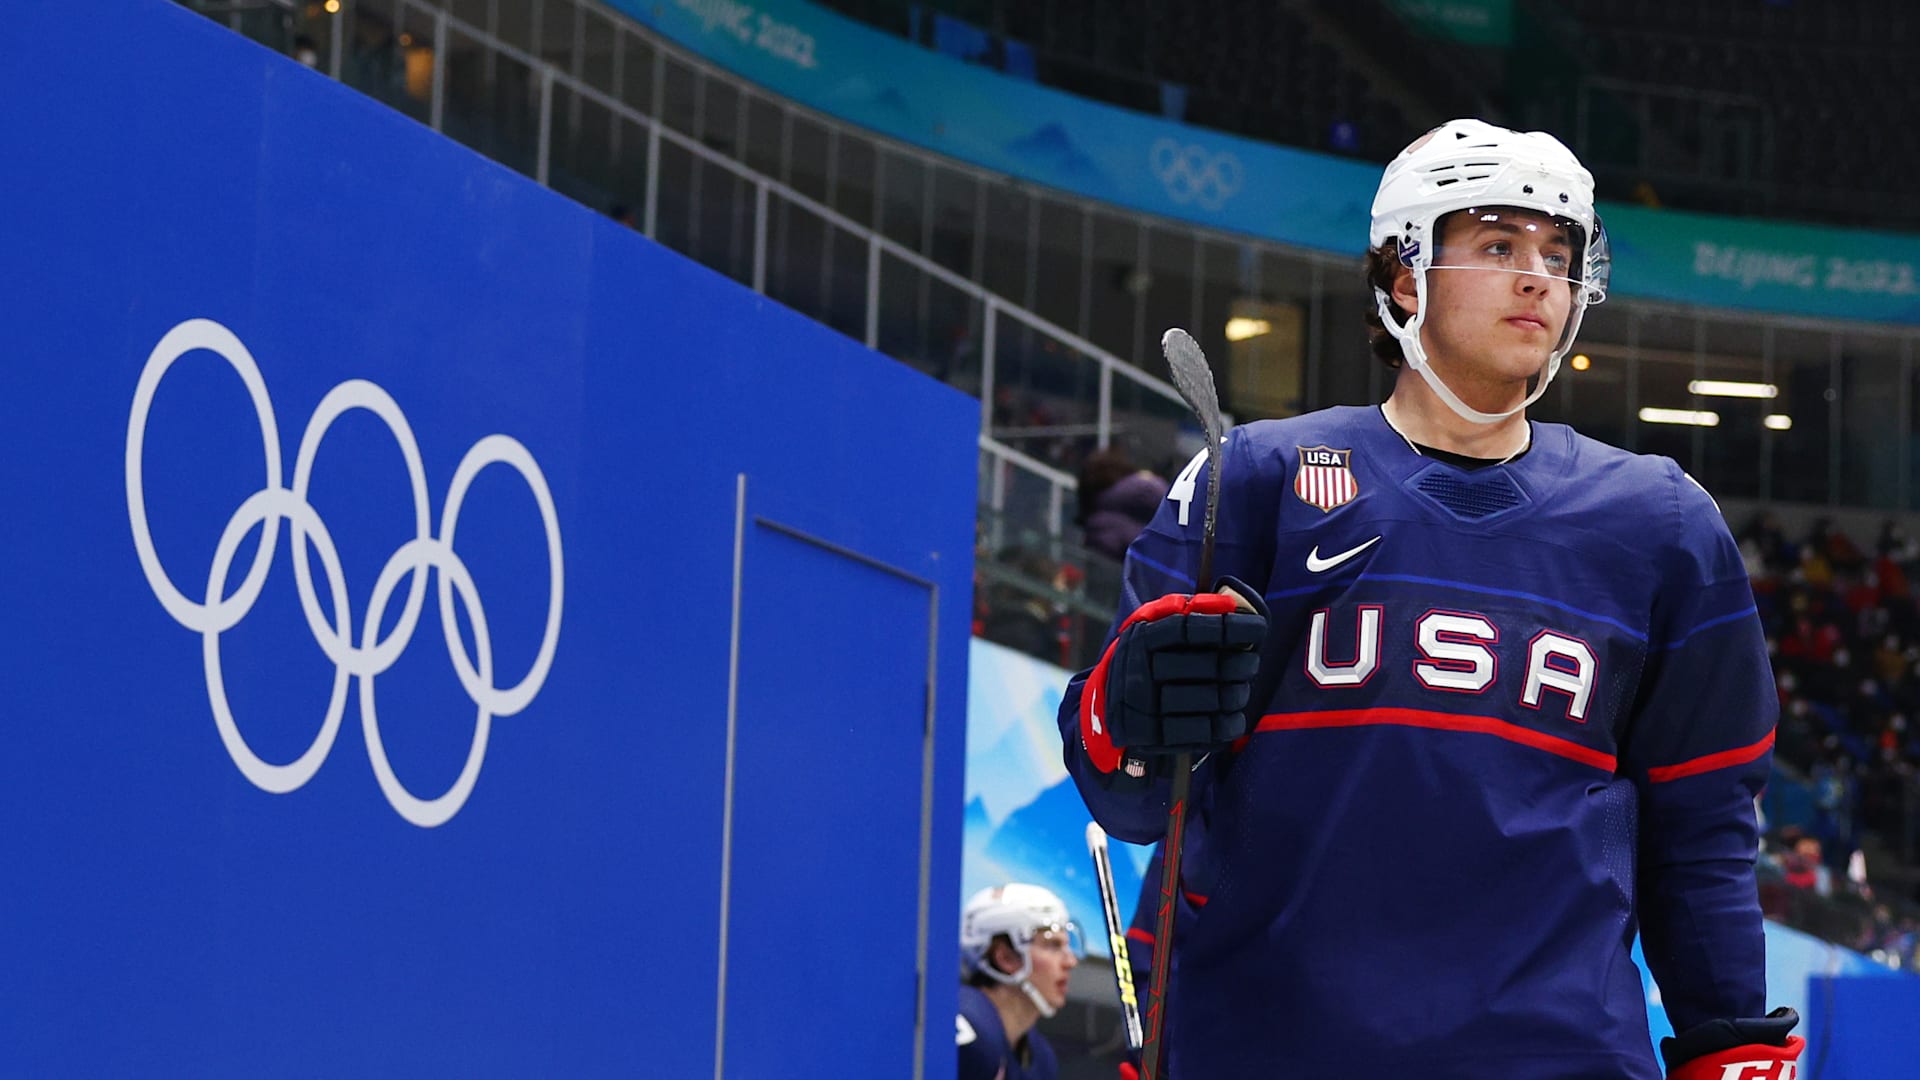 USA Hockey on X: 40 down, 20 to go! Let's do this! #TeamUSA